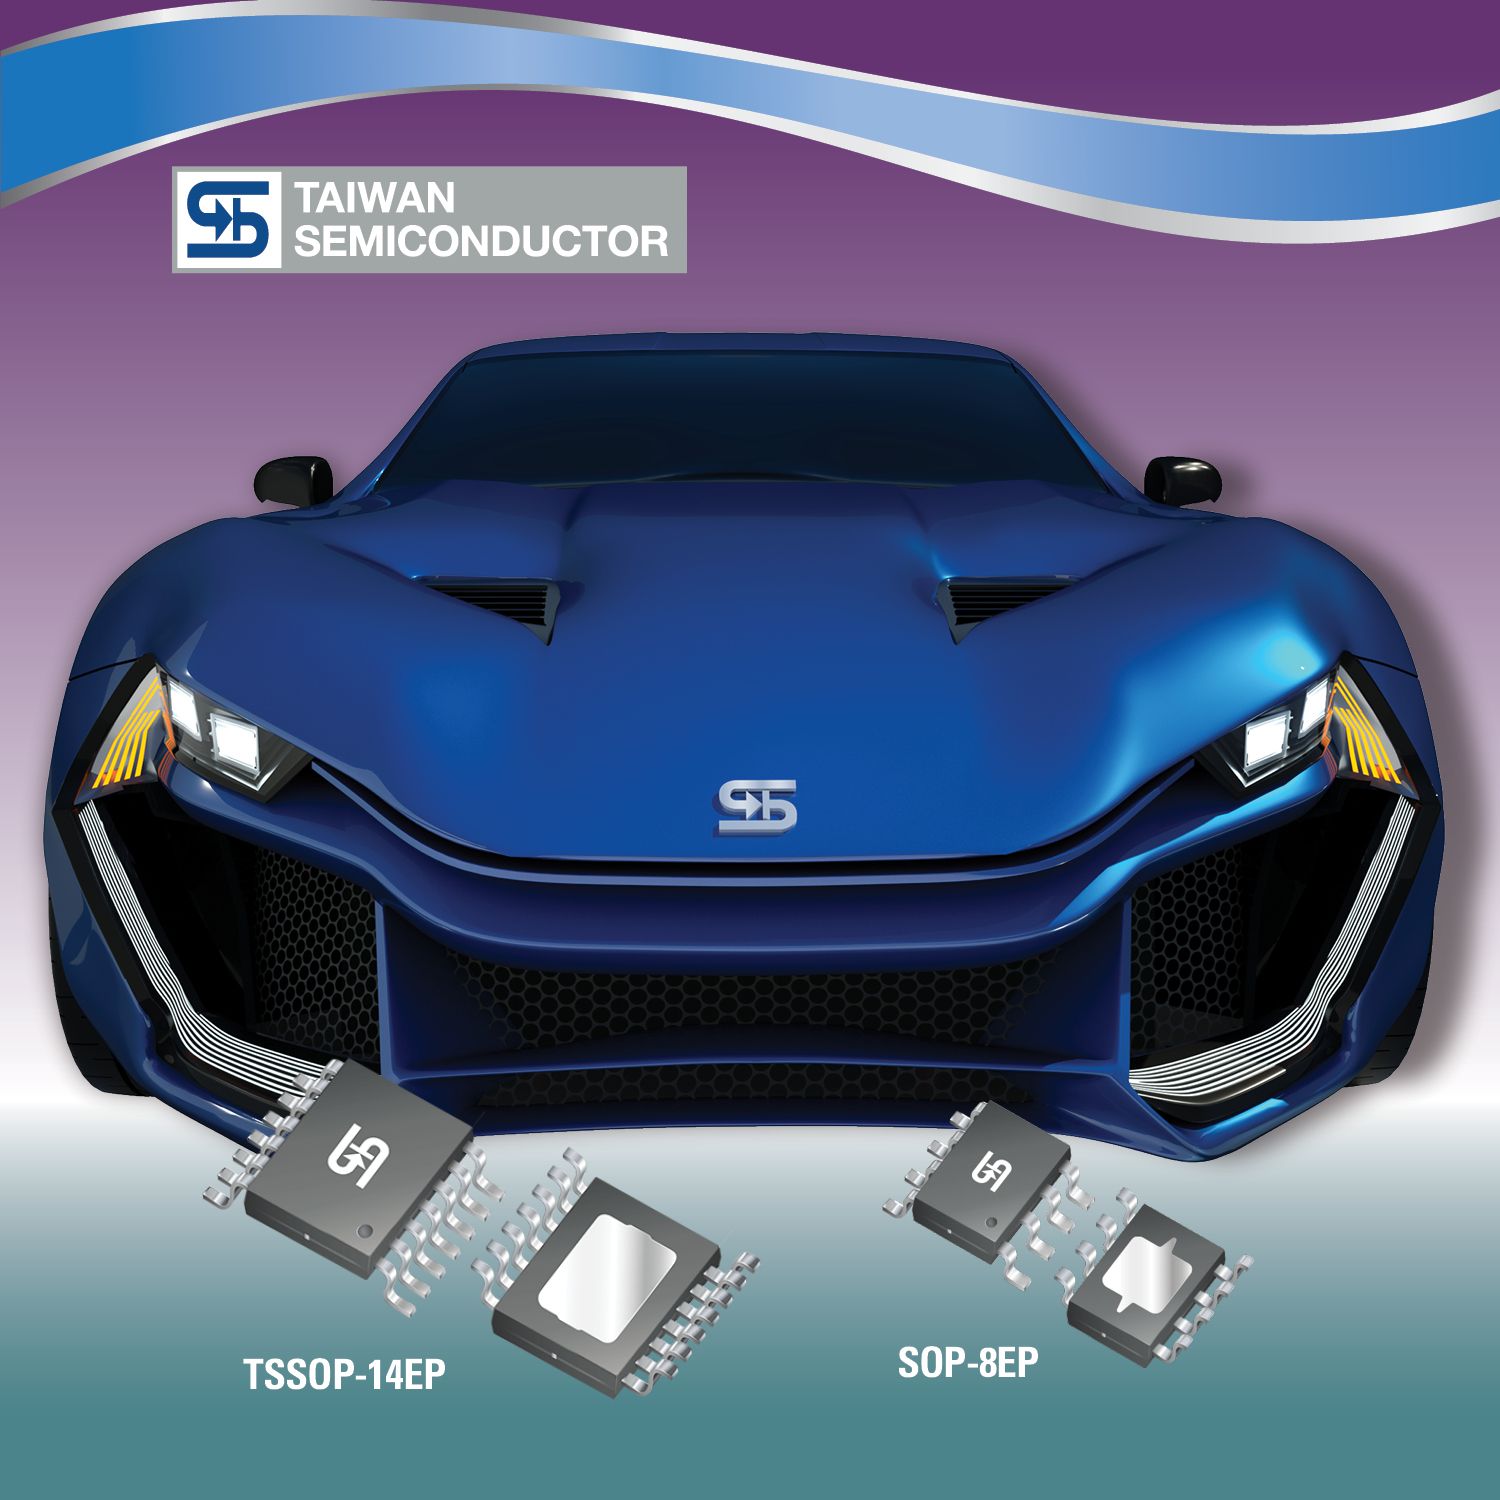 Taiwan Semiconductor Offers New Source for Critical Automotive-Grade Low-Dropout Linear Regulators